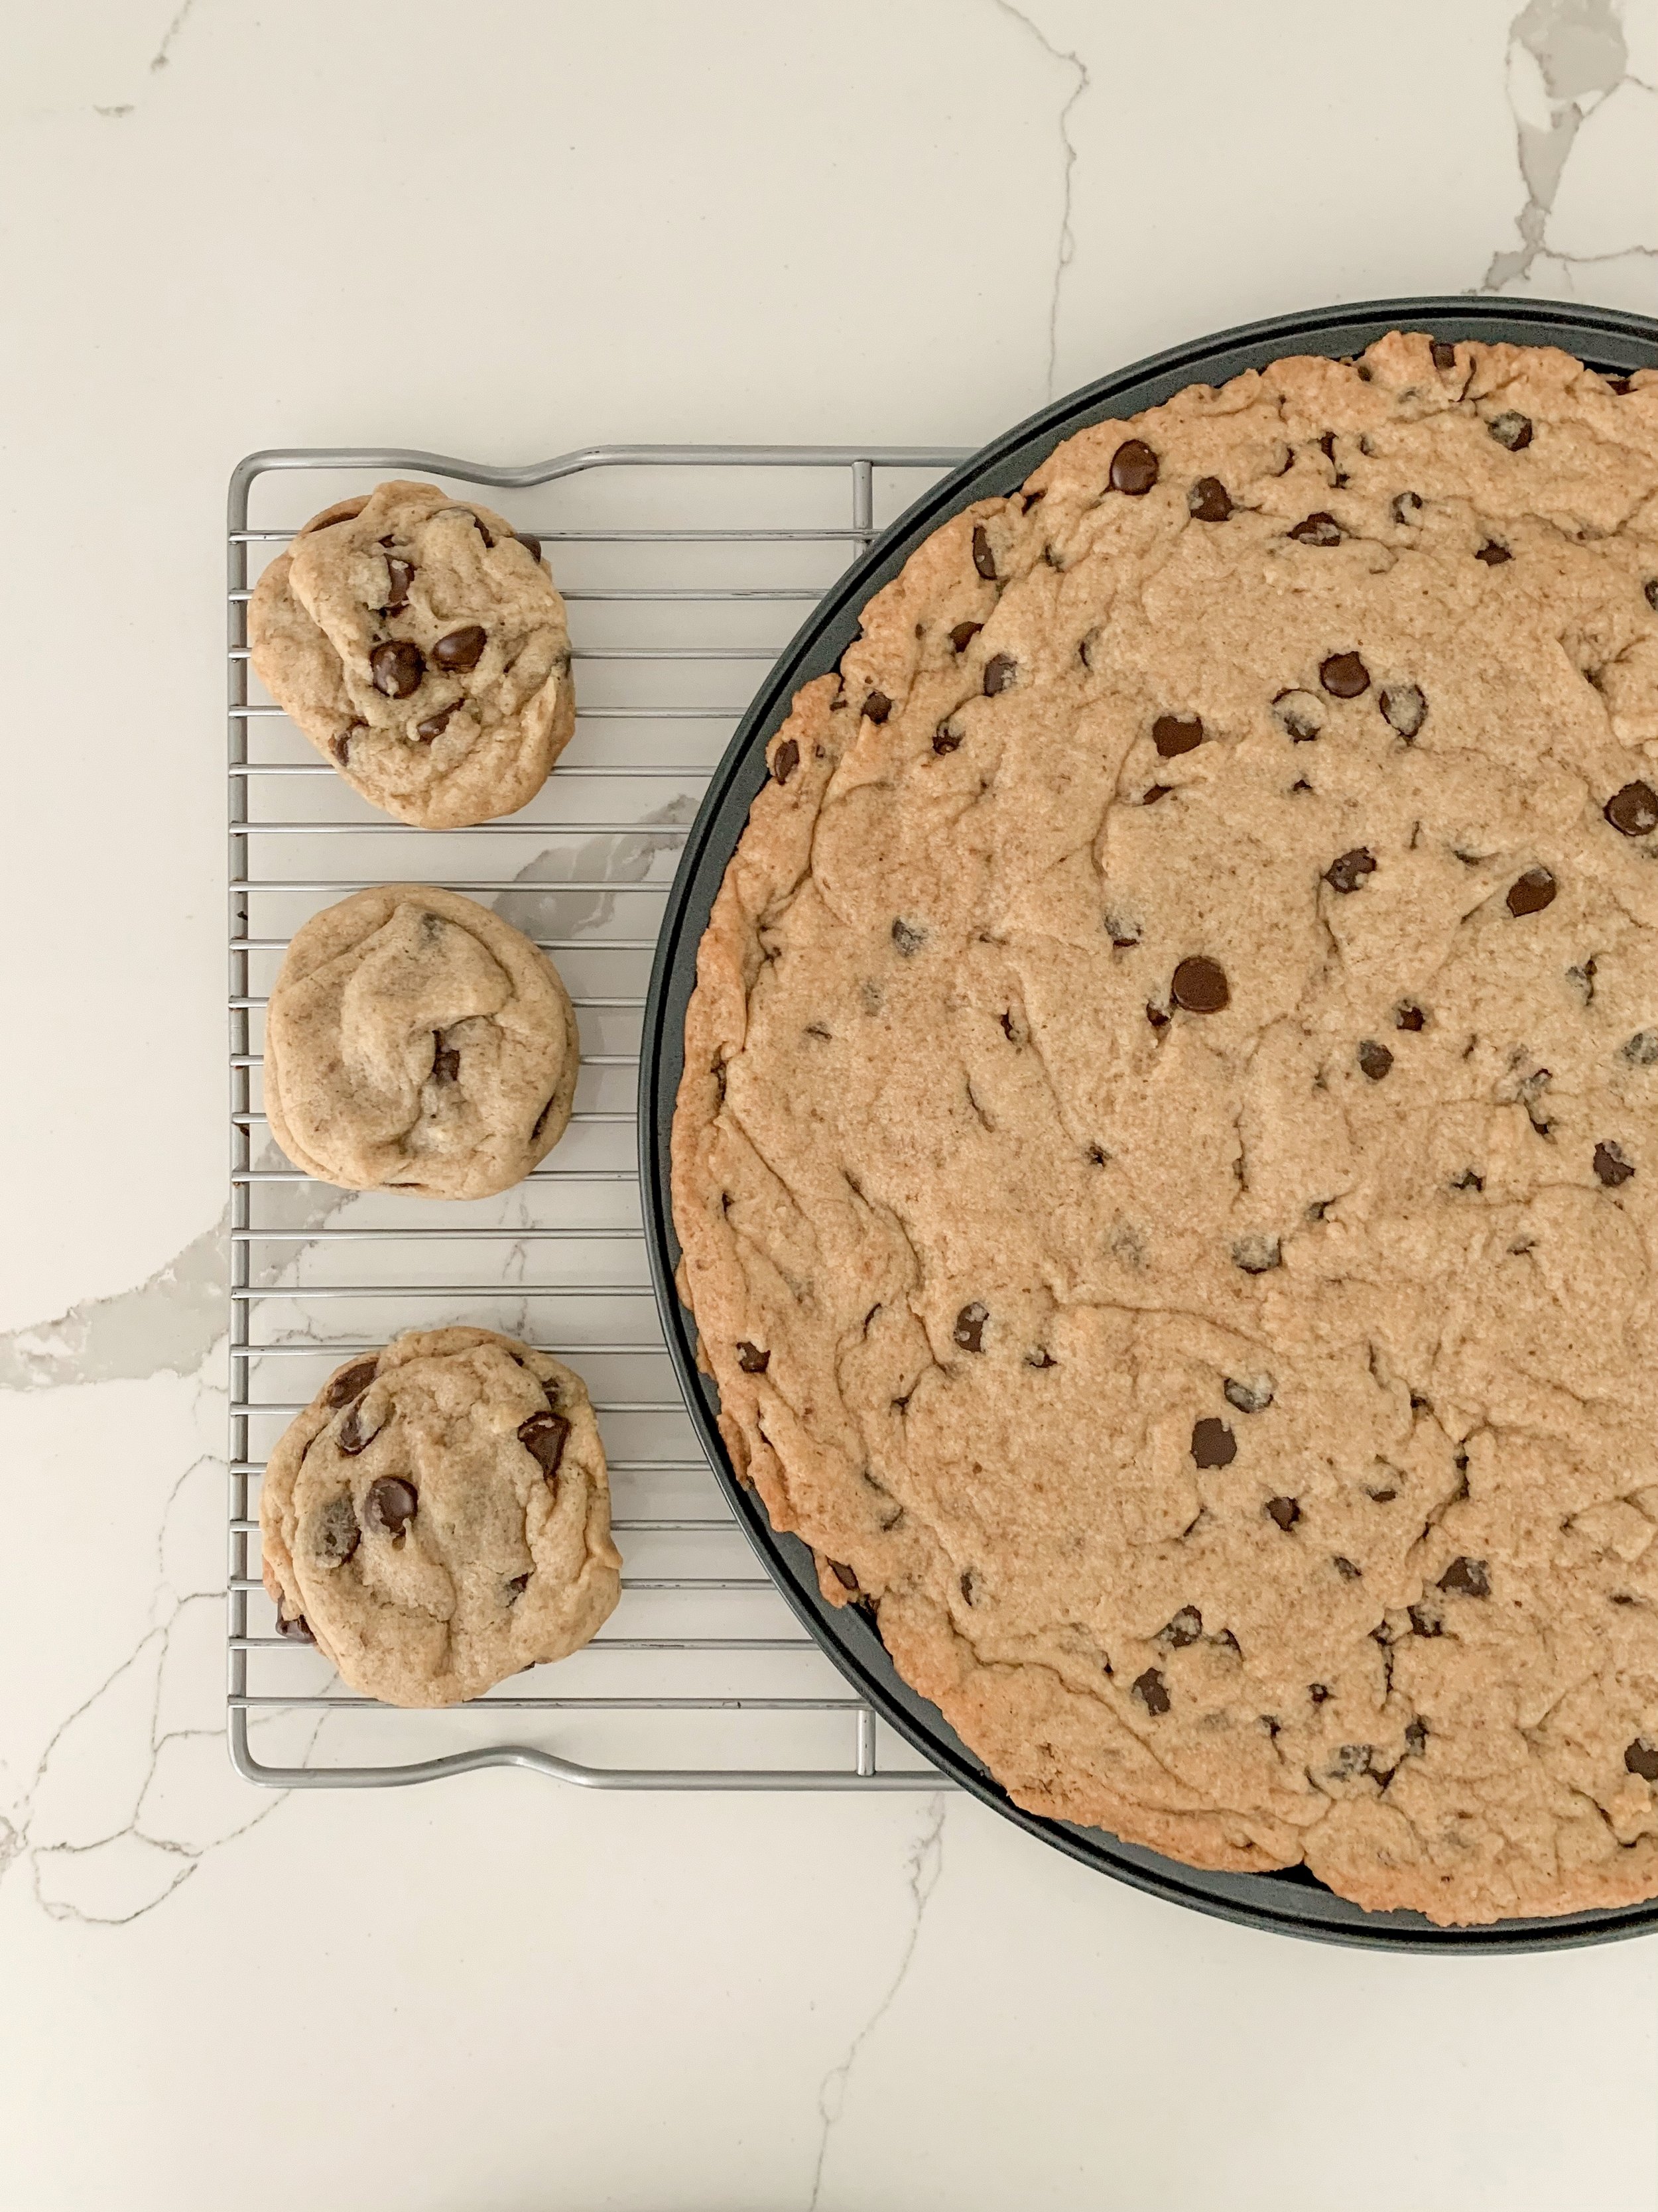 How to Make a Giant Chocolate Chip Pan Cookie